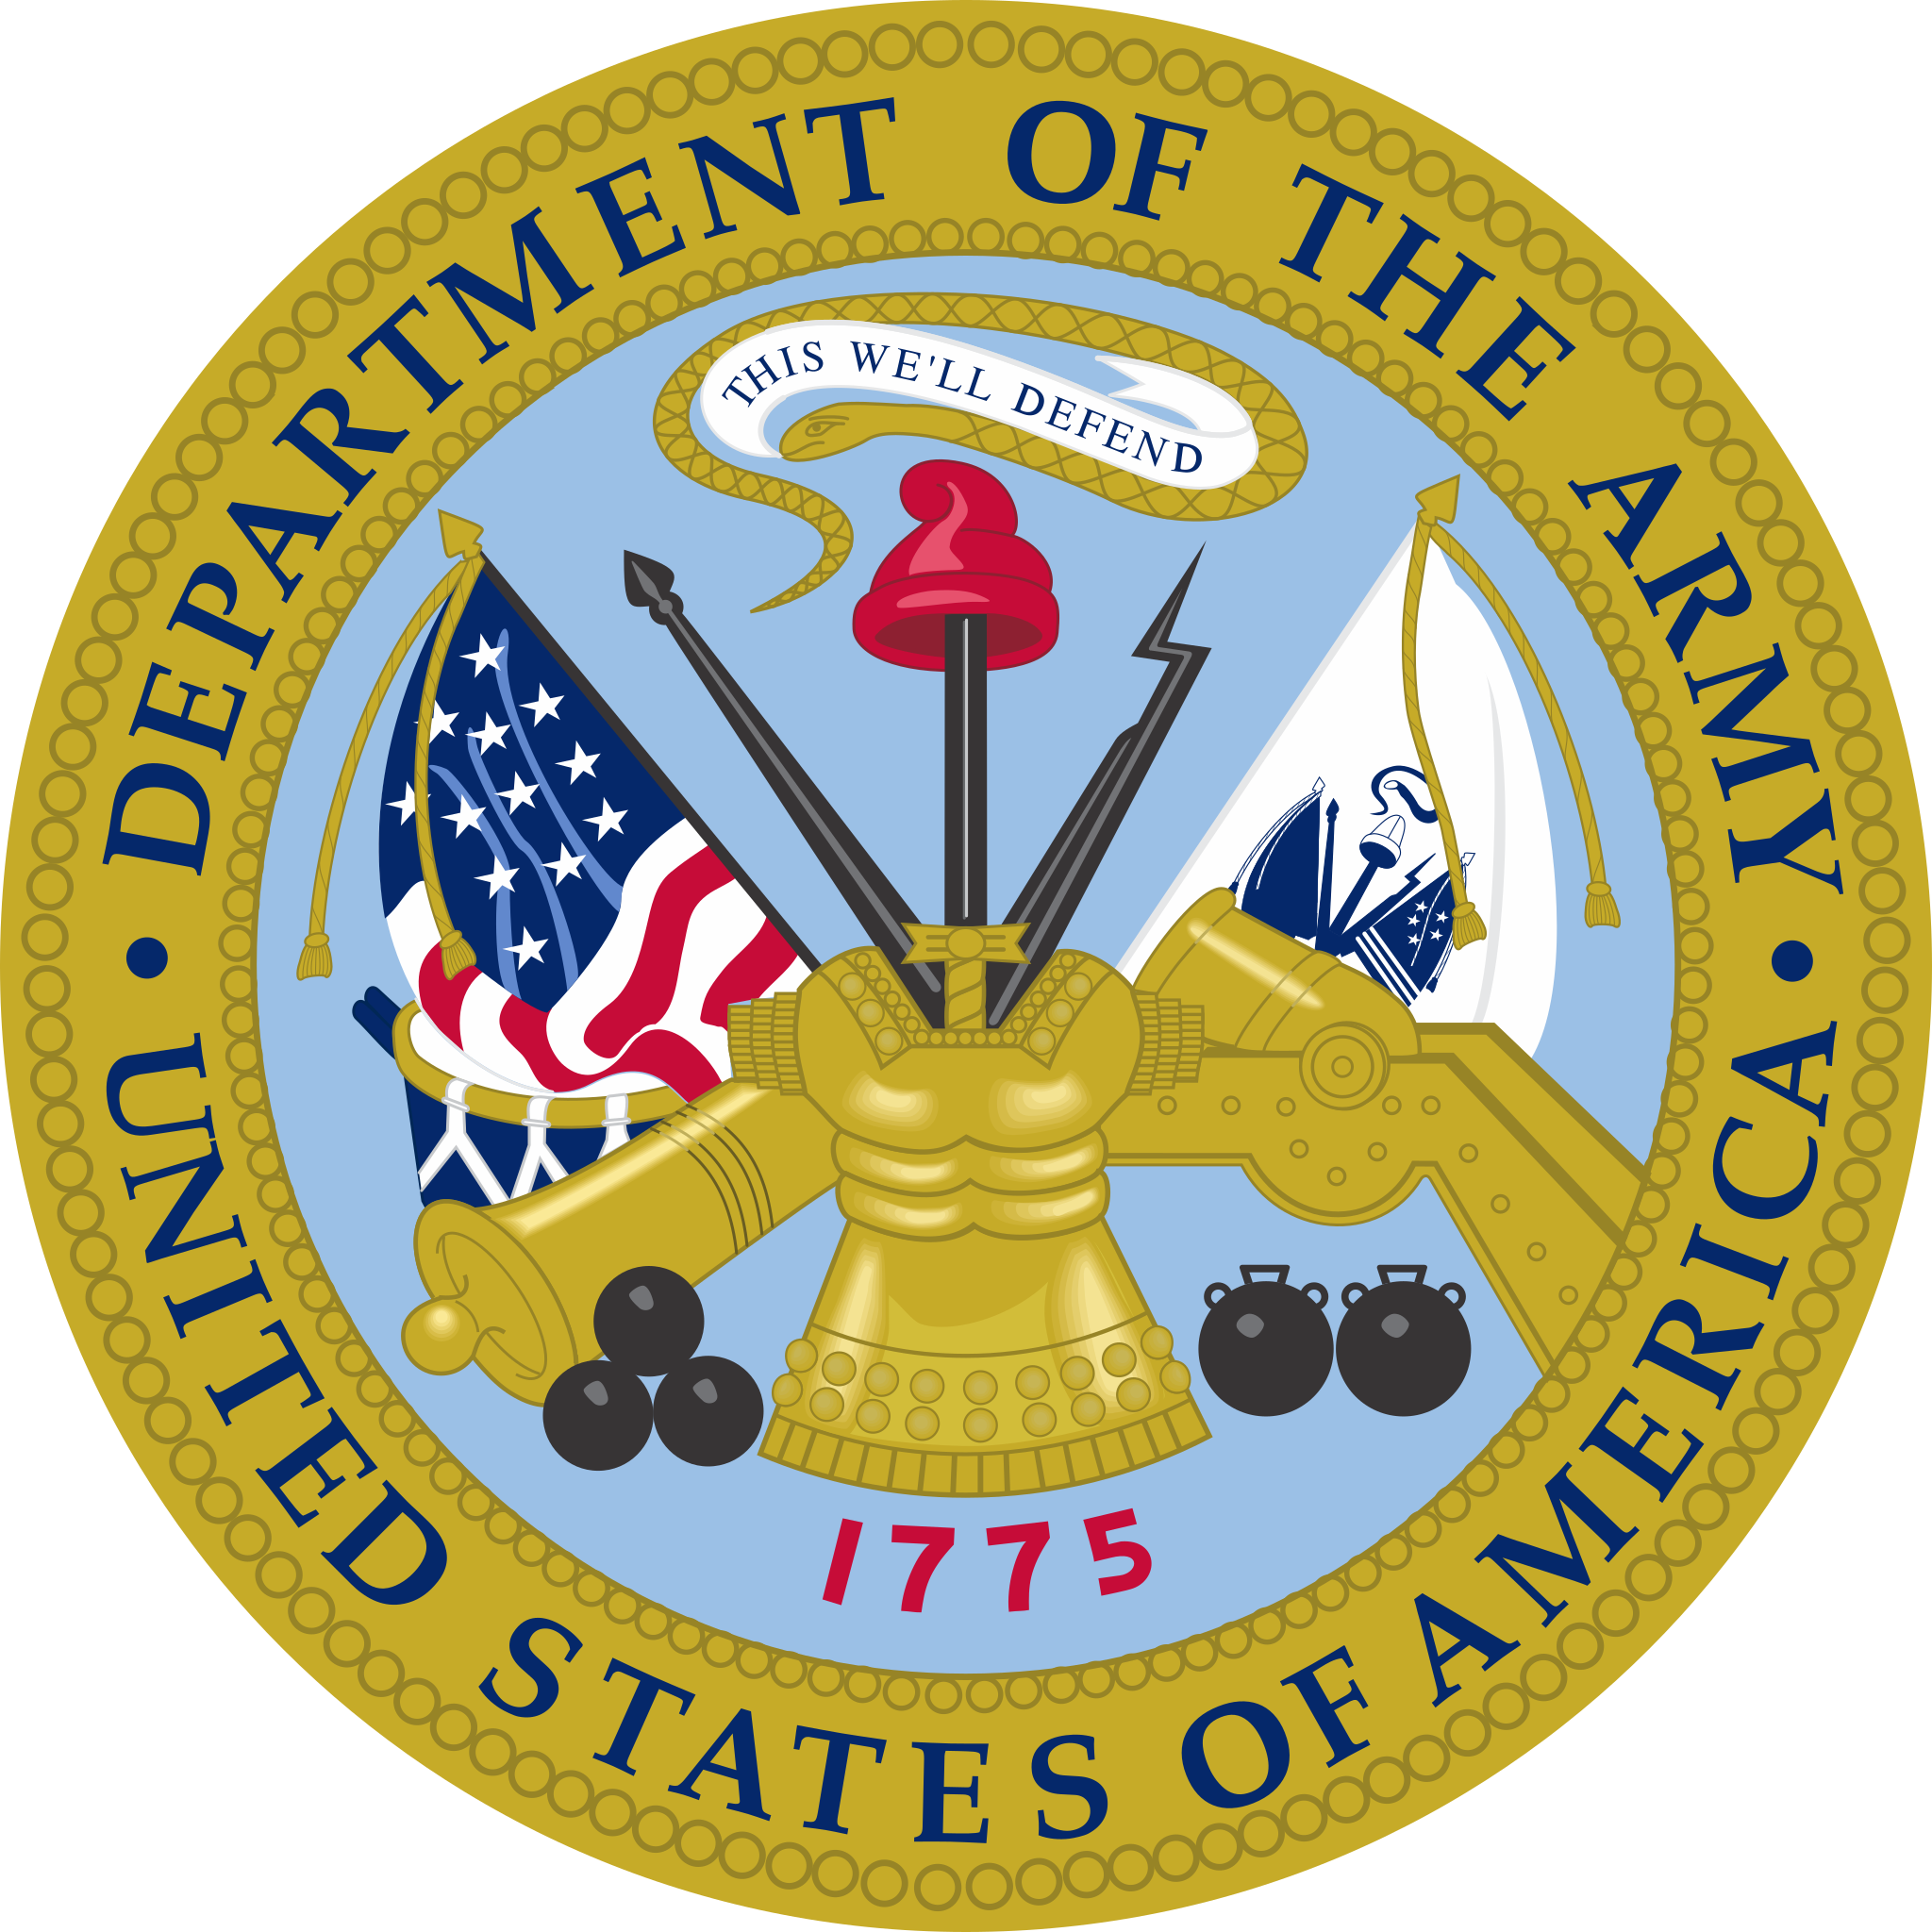 This is an image of the United States Department of the Army logo.